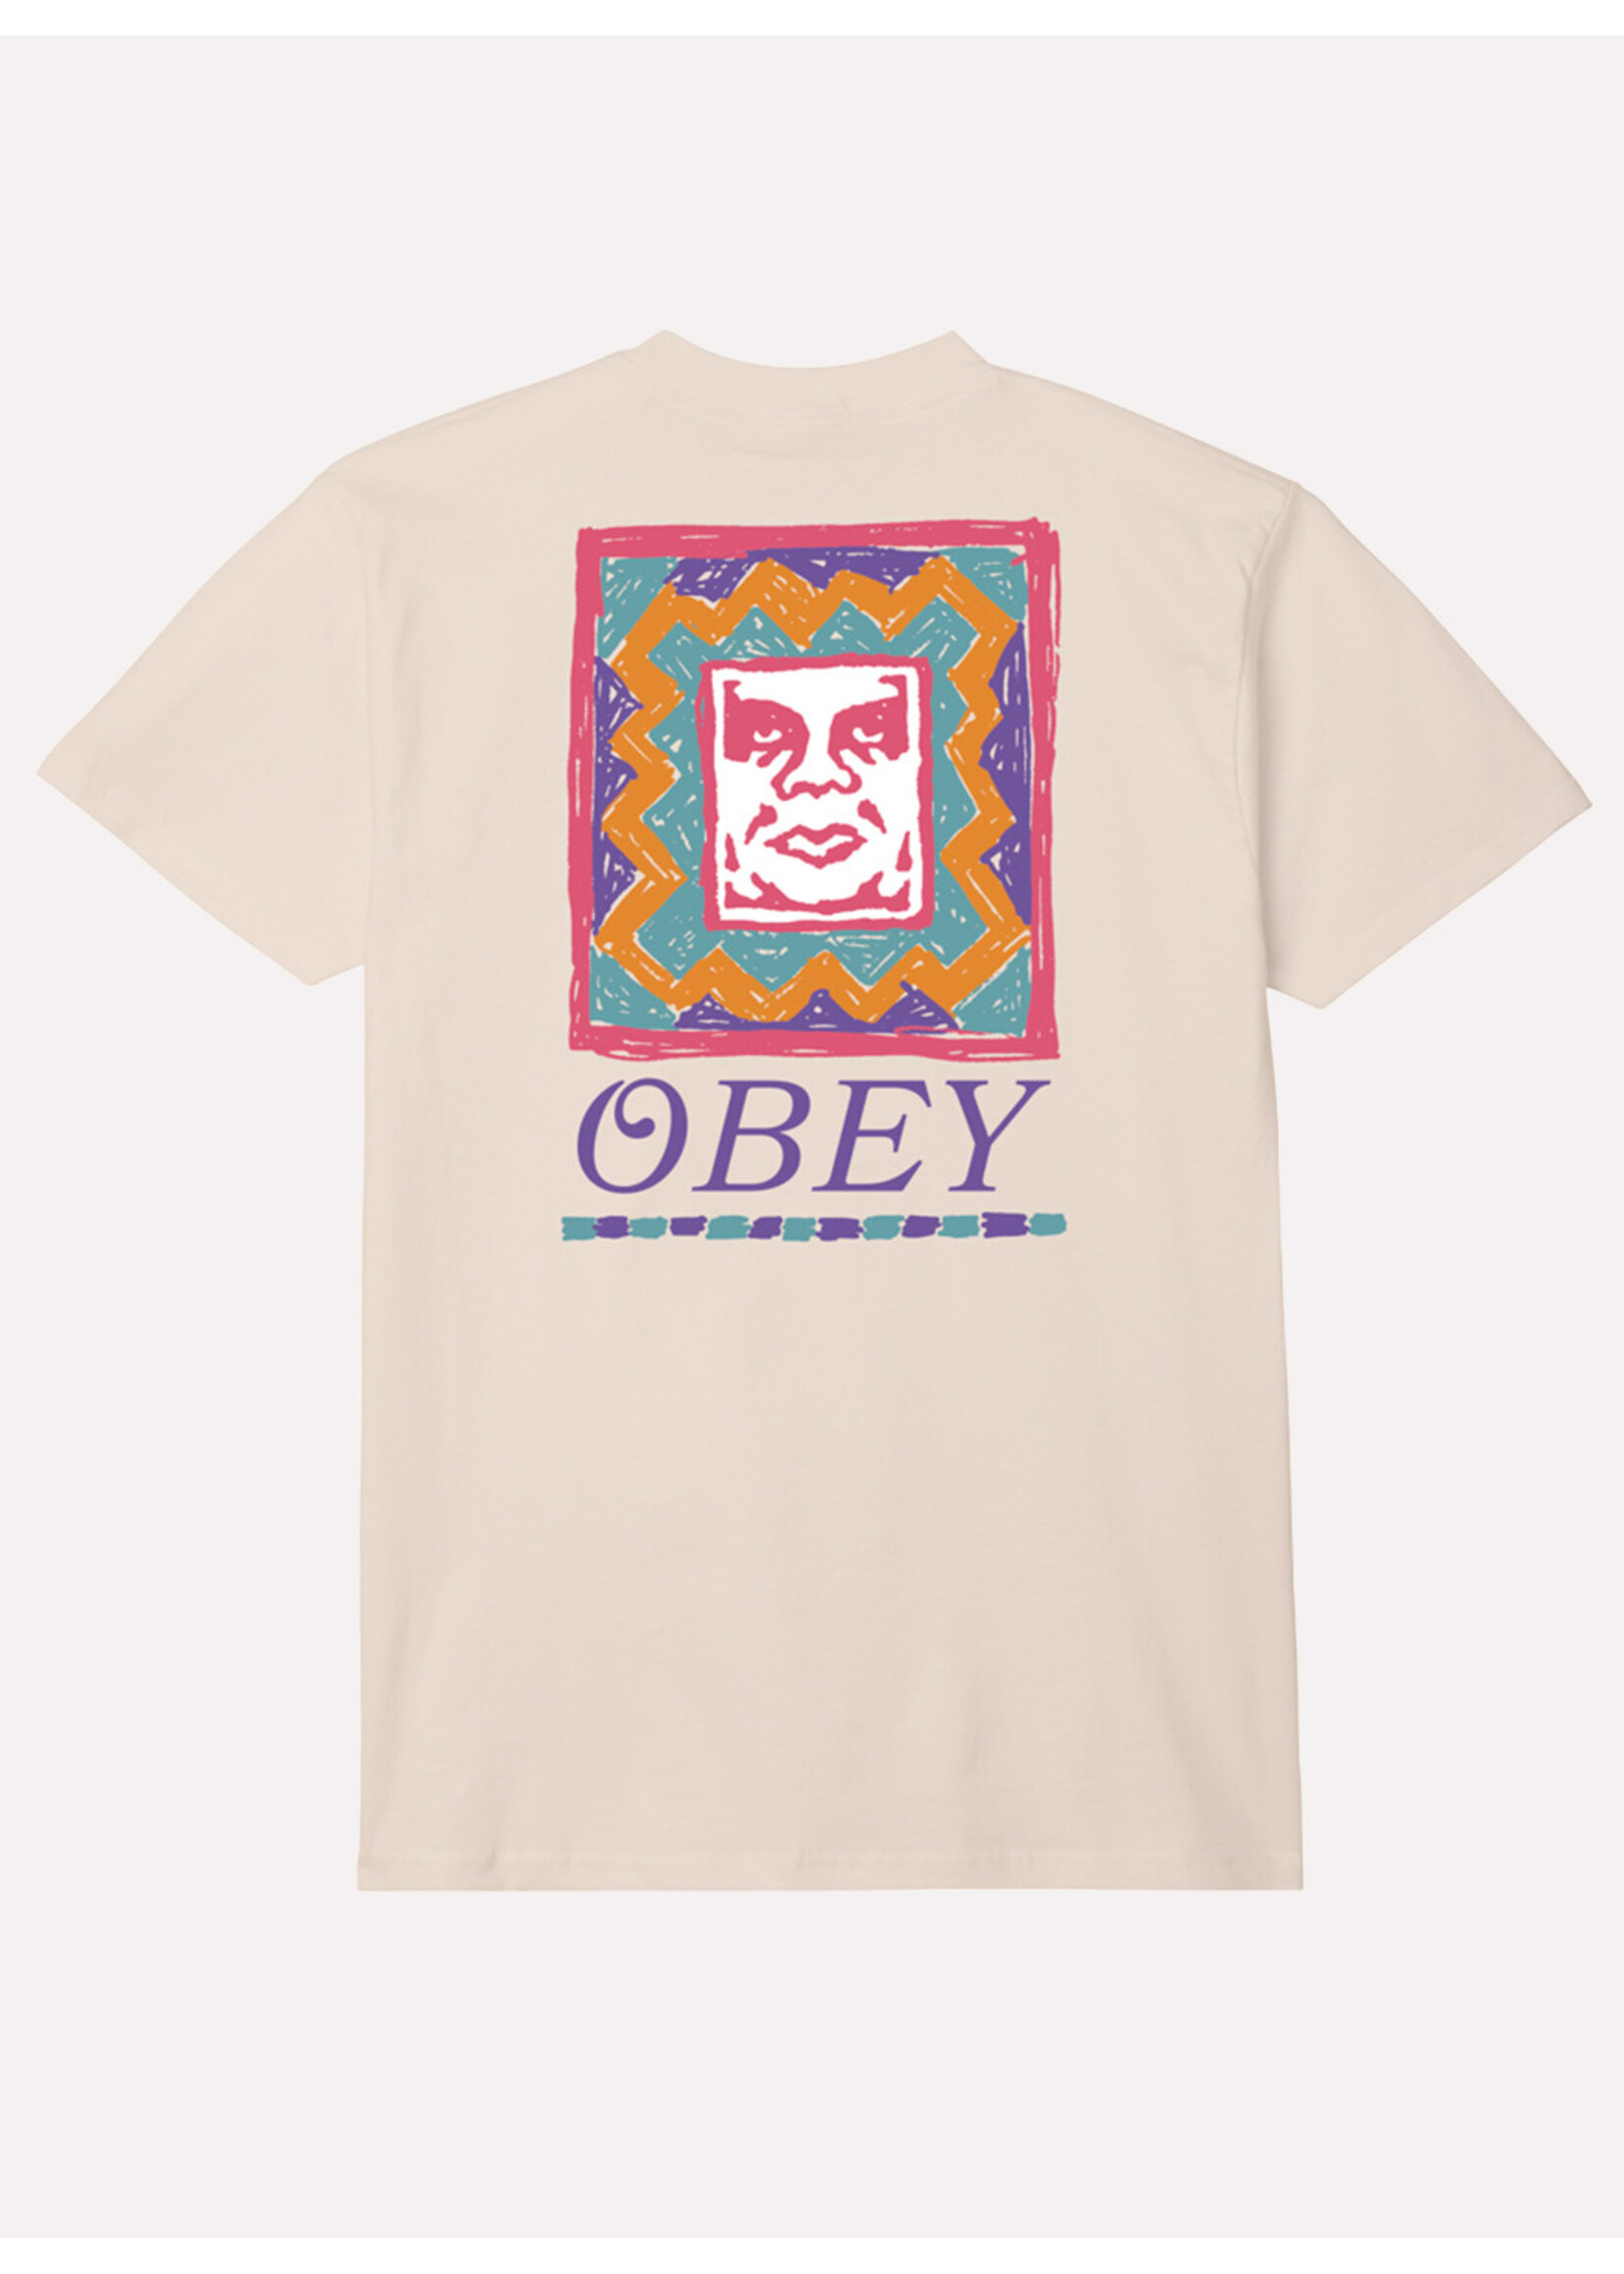 Obey Obey Throwback Tee Cream 165263786-CRM